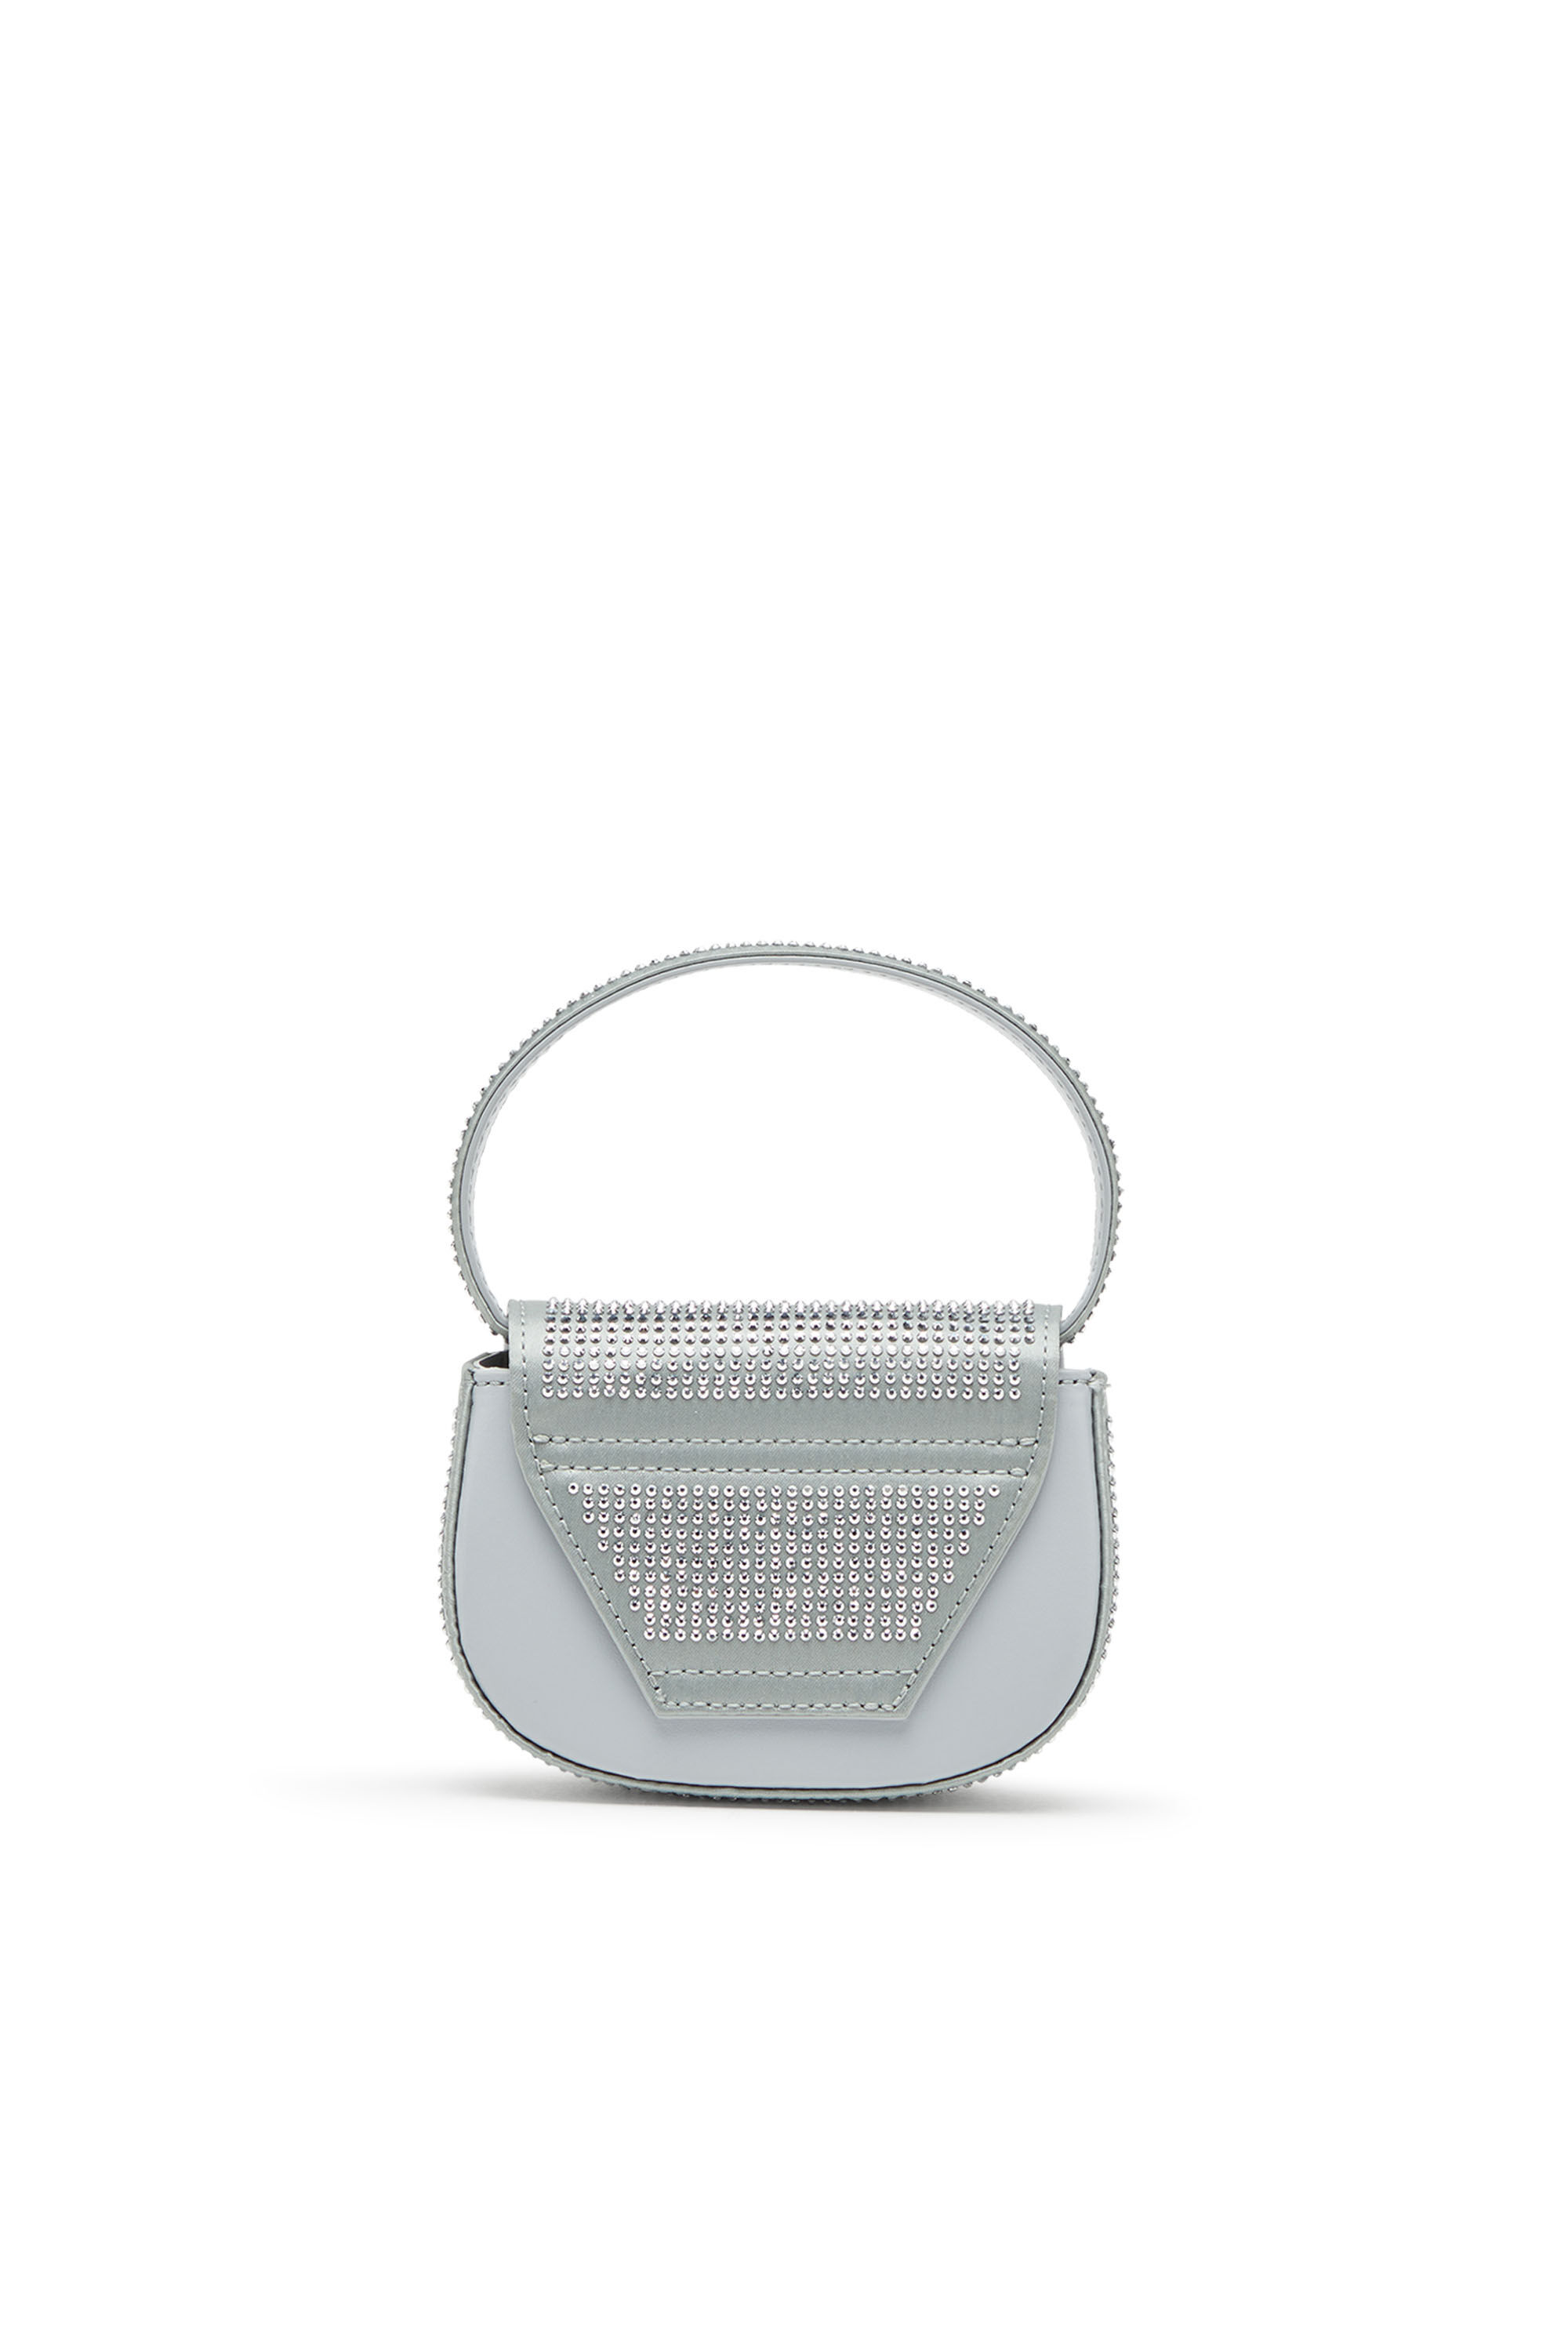 Diesel - 1DR XS, Woman 1DR XS Cross Bodybag - Iconic mini bag in crystal satin in Silver - Image 3